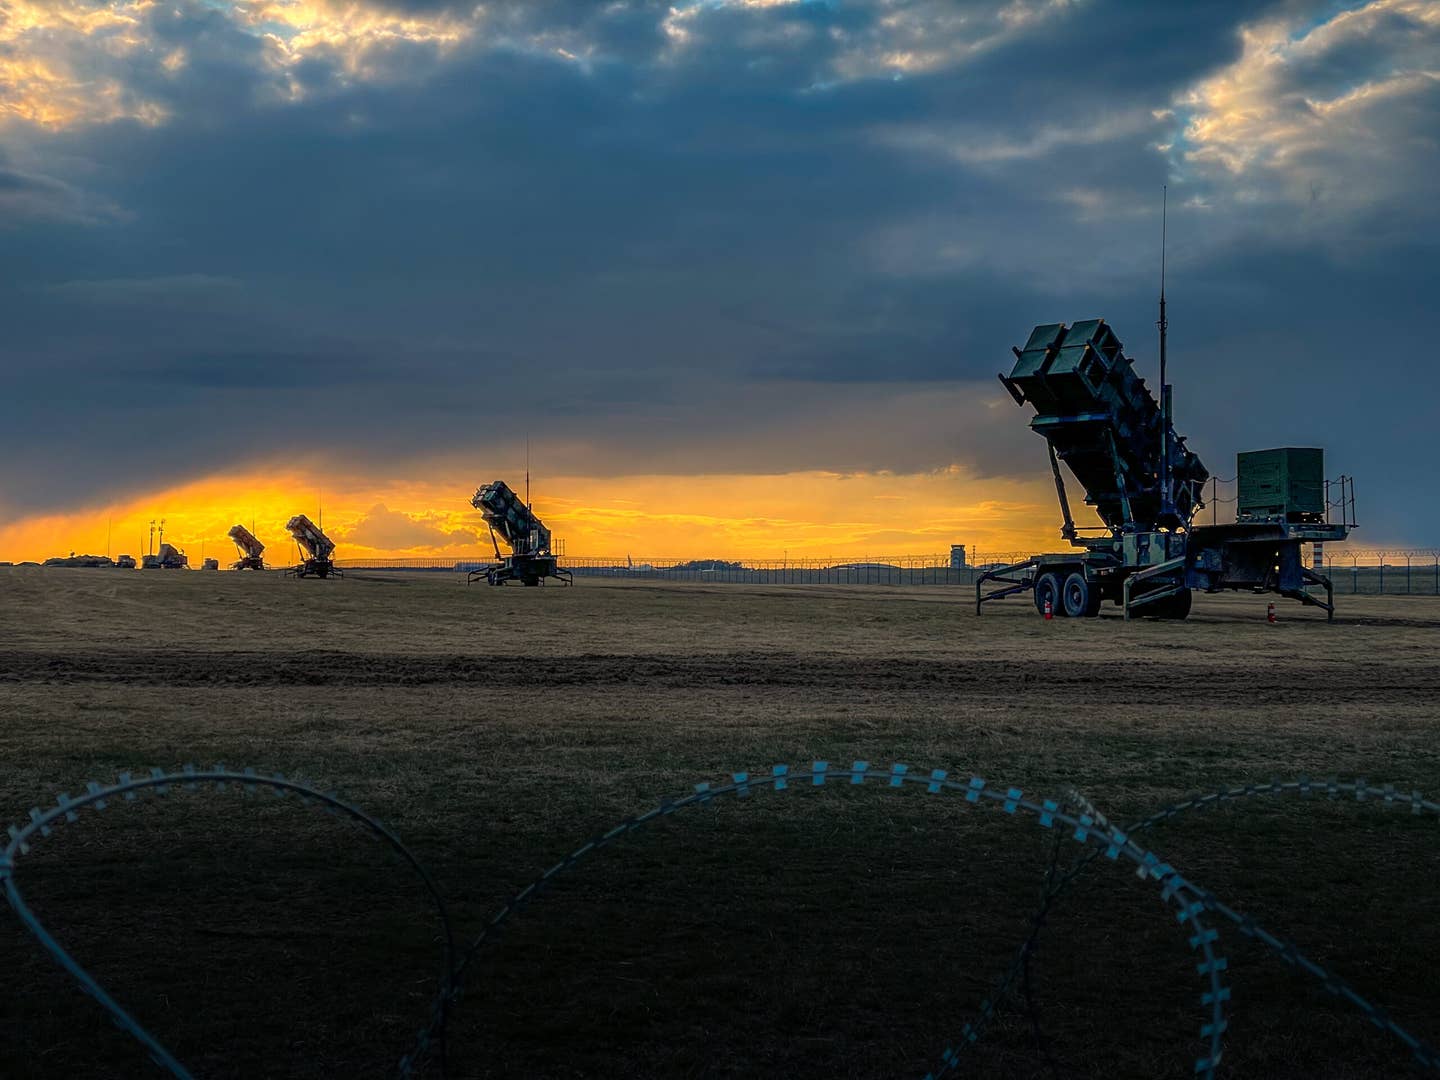 U.S. Patriot missile batteries from the 5th Battalion, 7th Air Defense Artillery Regiment stand ready at sunset in Poland on April 10, 2022. (U.S. Army photo by Sgt. 1st Class Christopher Smith)